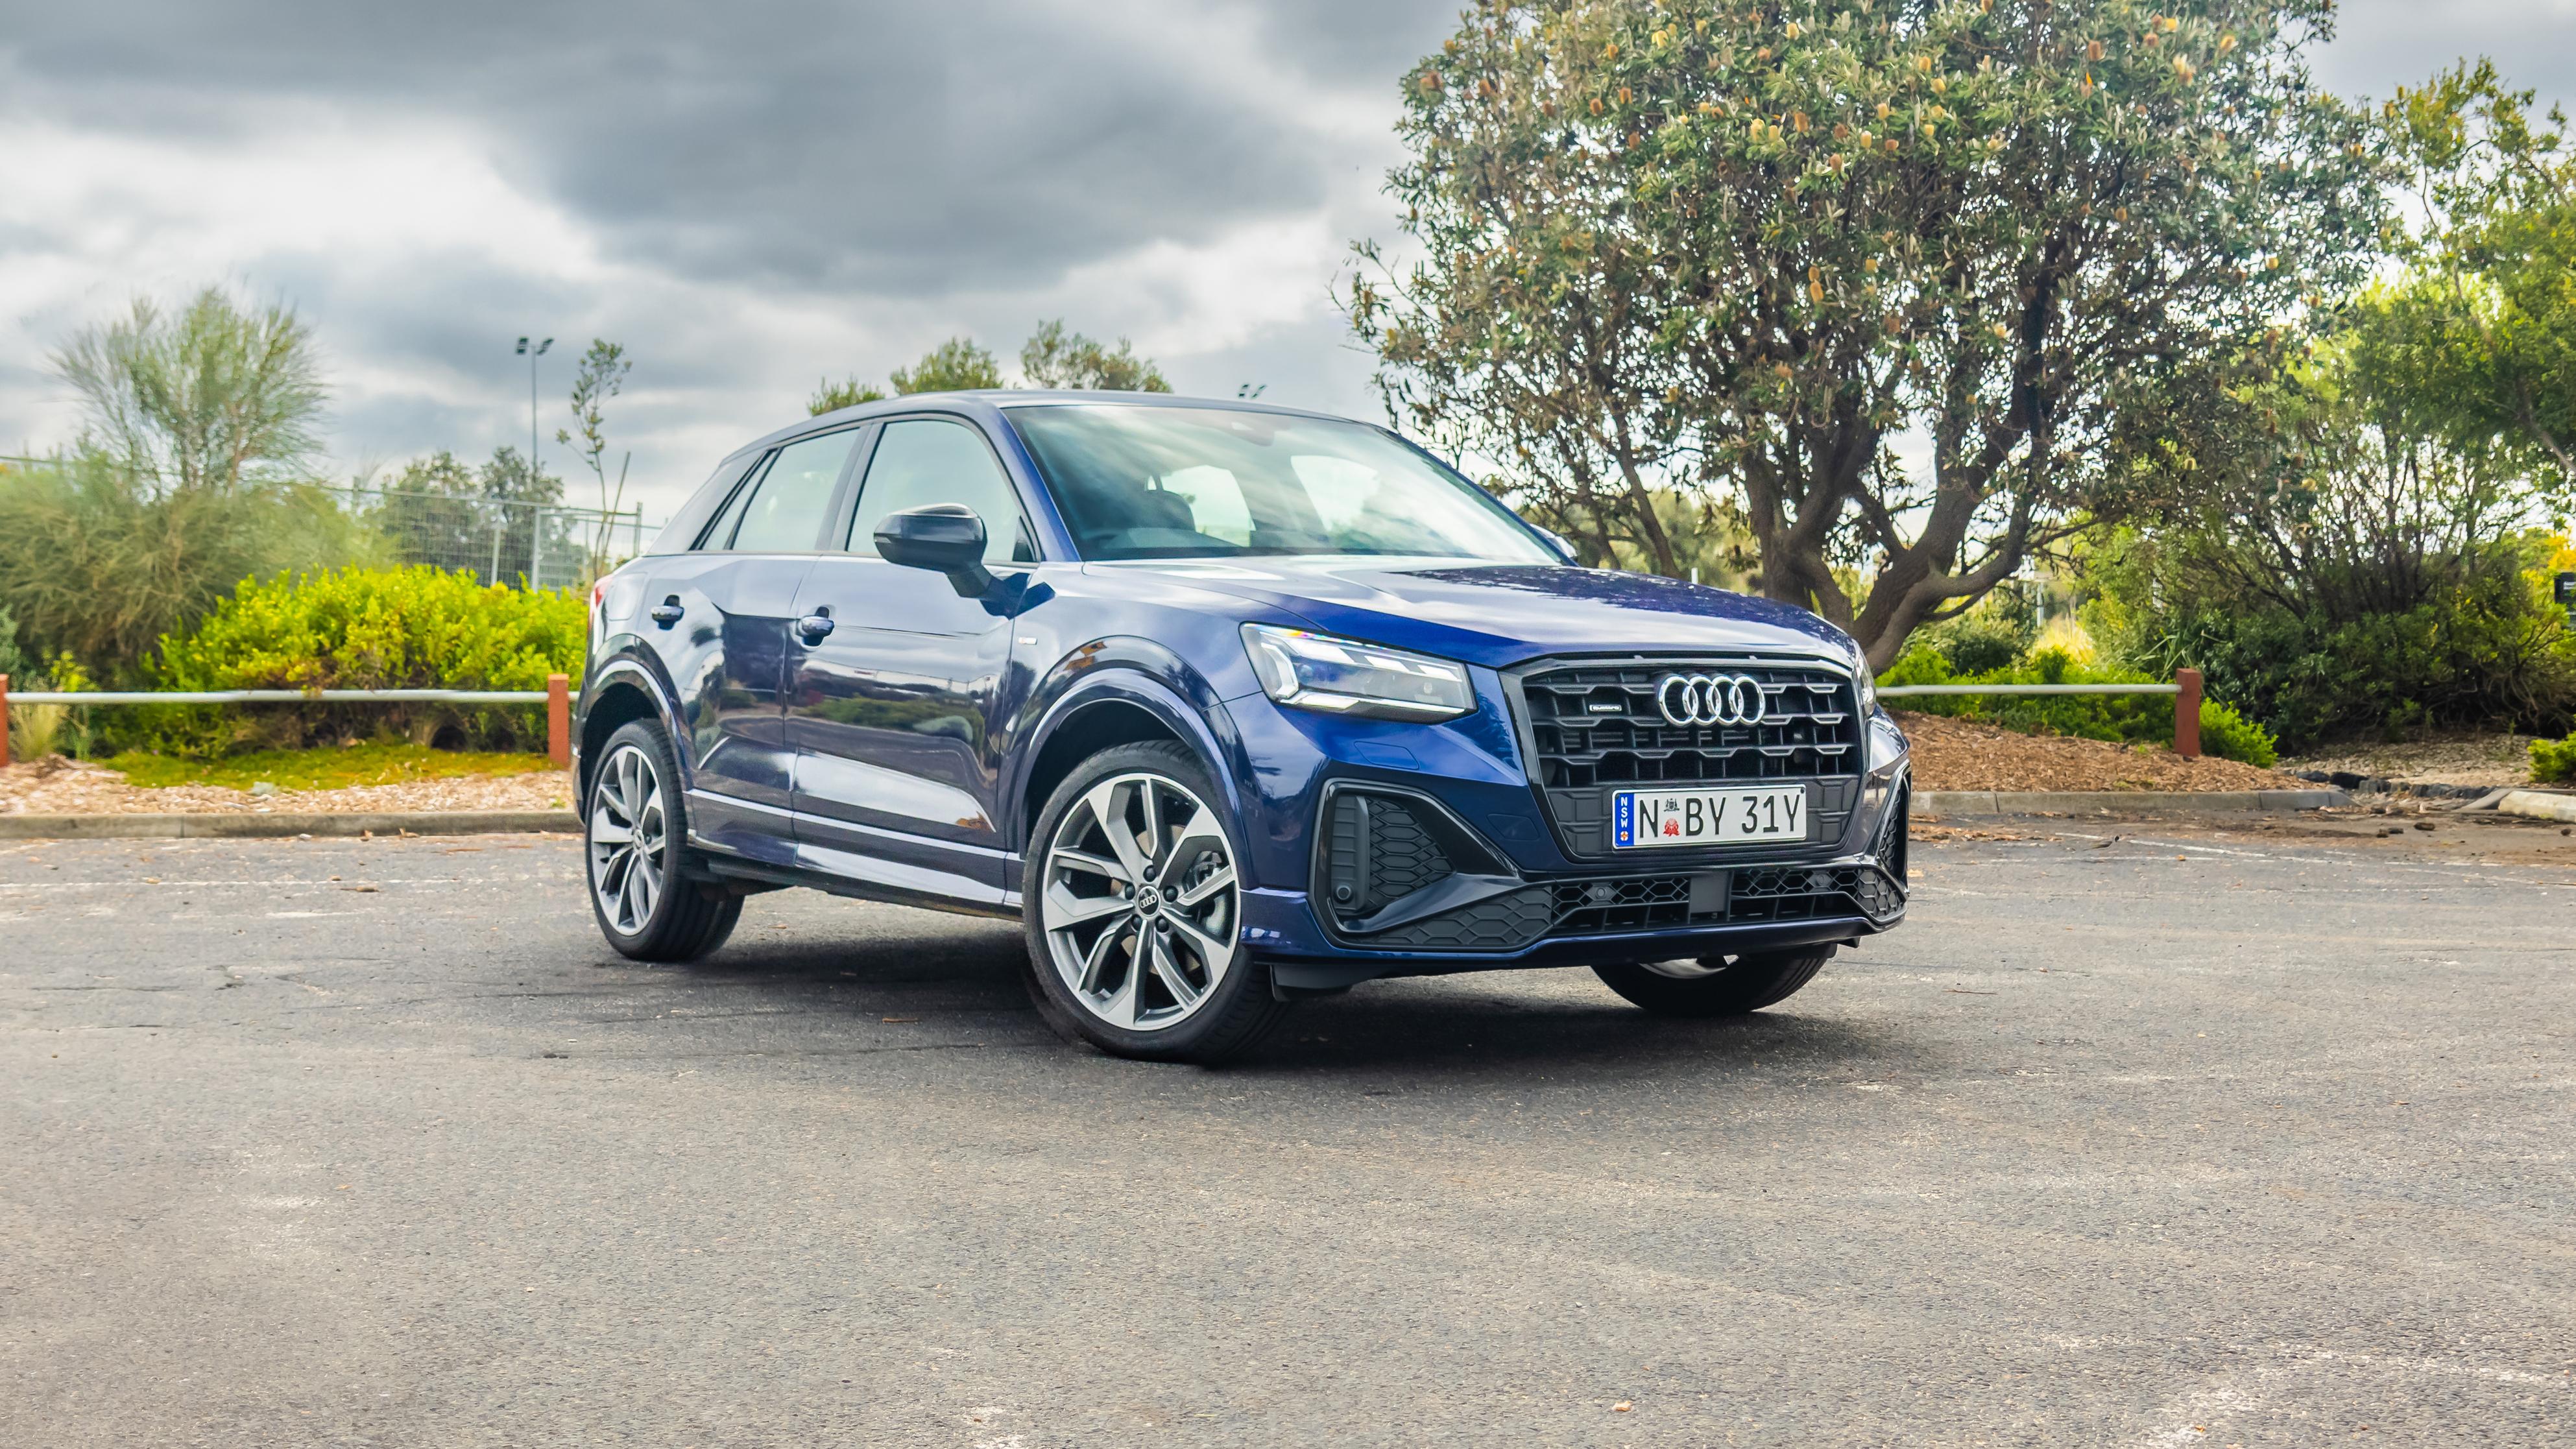 2020 Audi Q2 May Be Small, but It Has Plenty to Recommend It